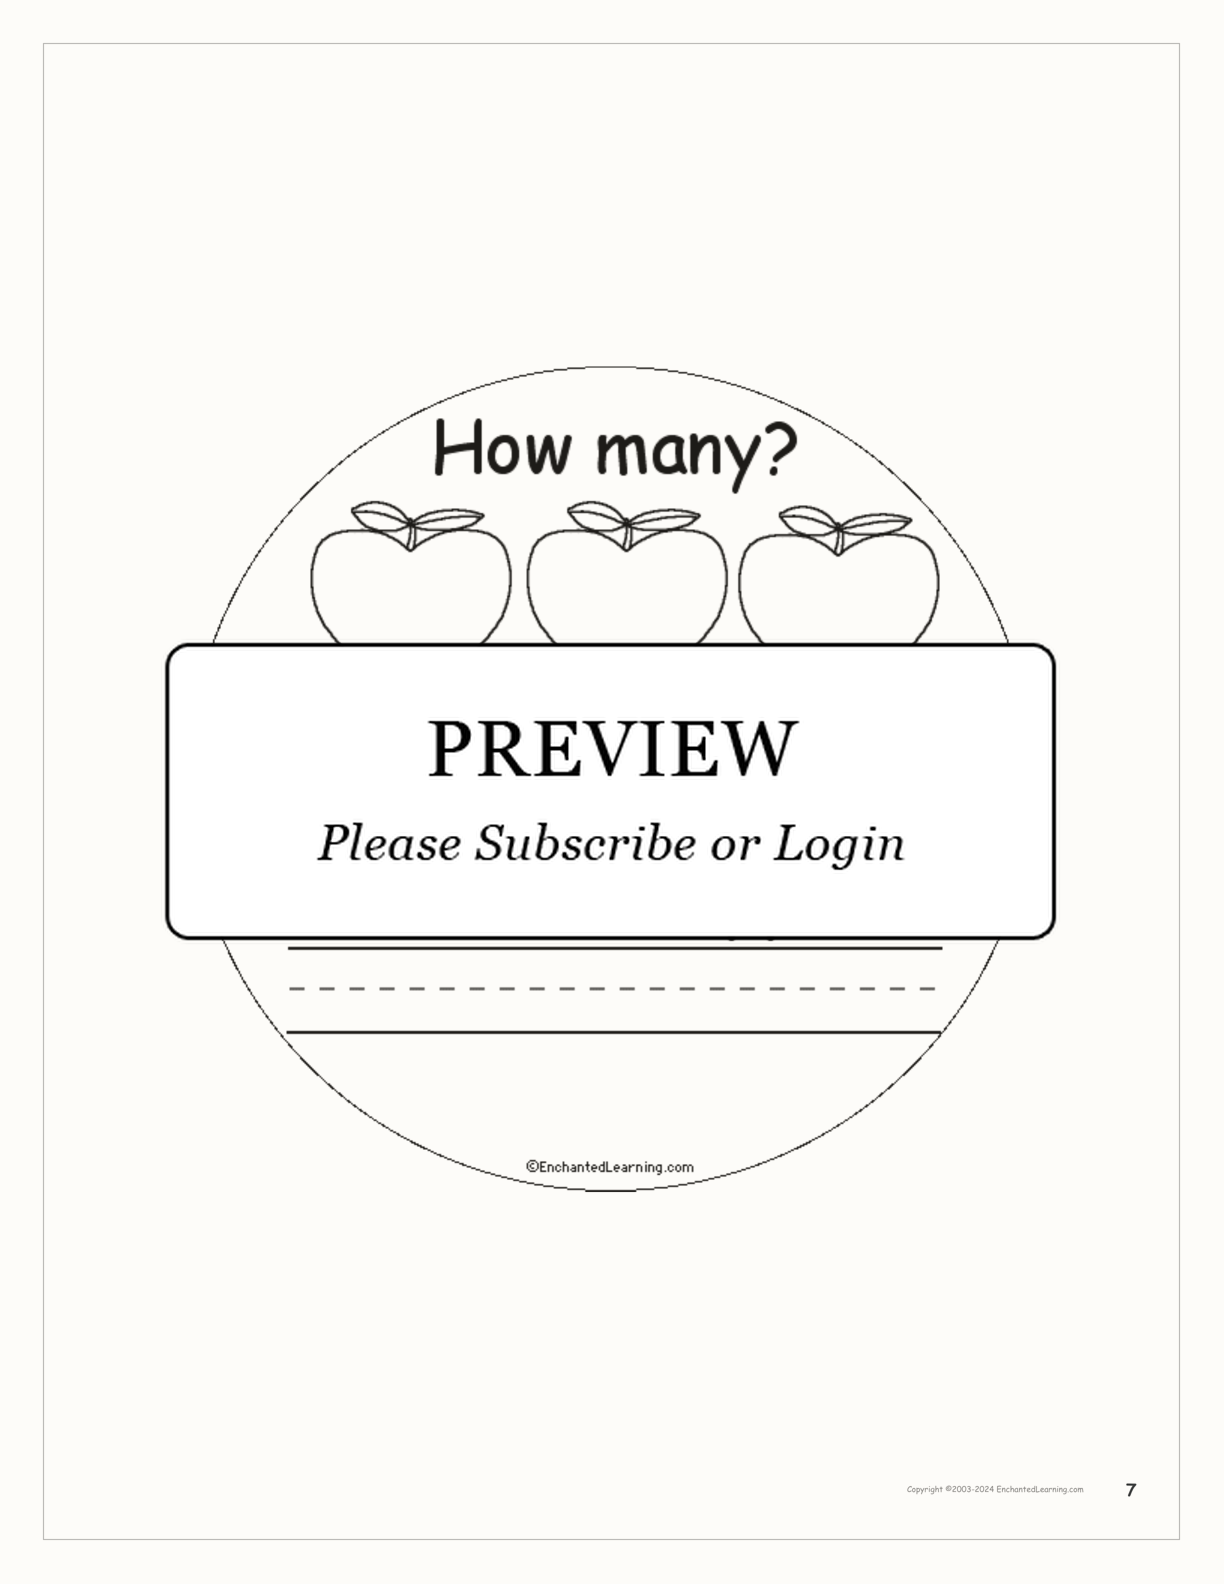 How Many Apples? interactive printout page 7